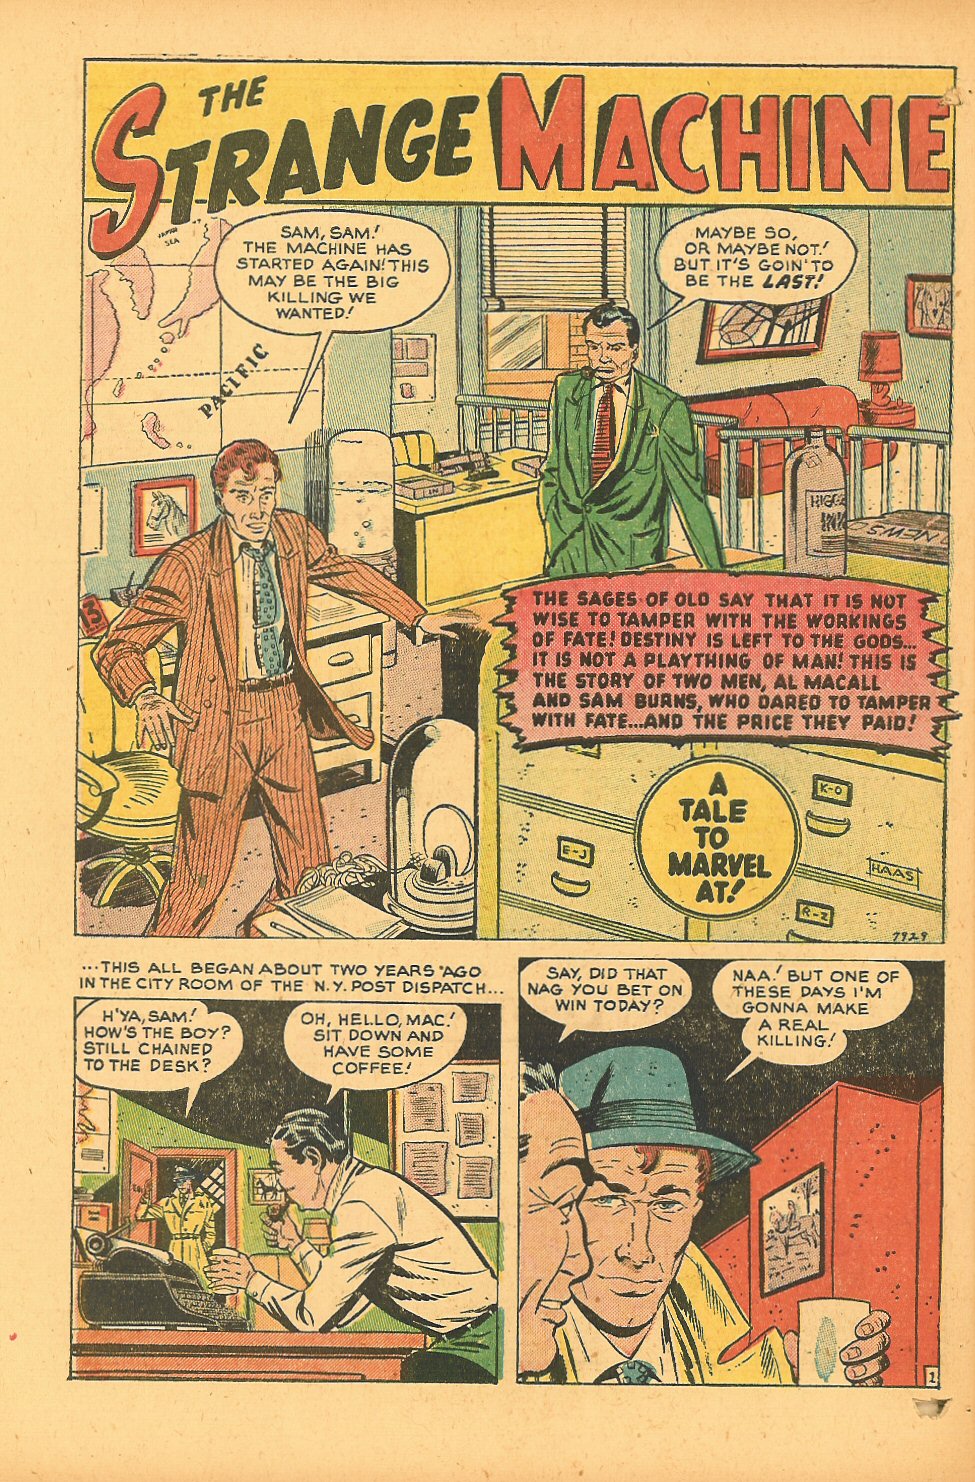 Marvel Tales (1949) 100 Page 18